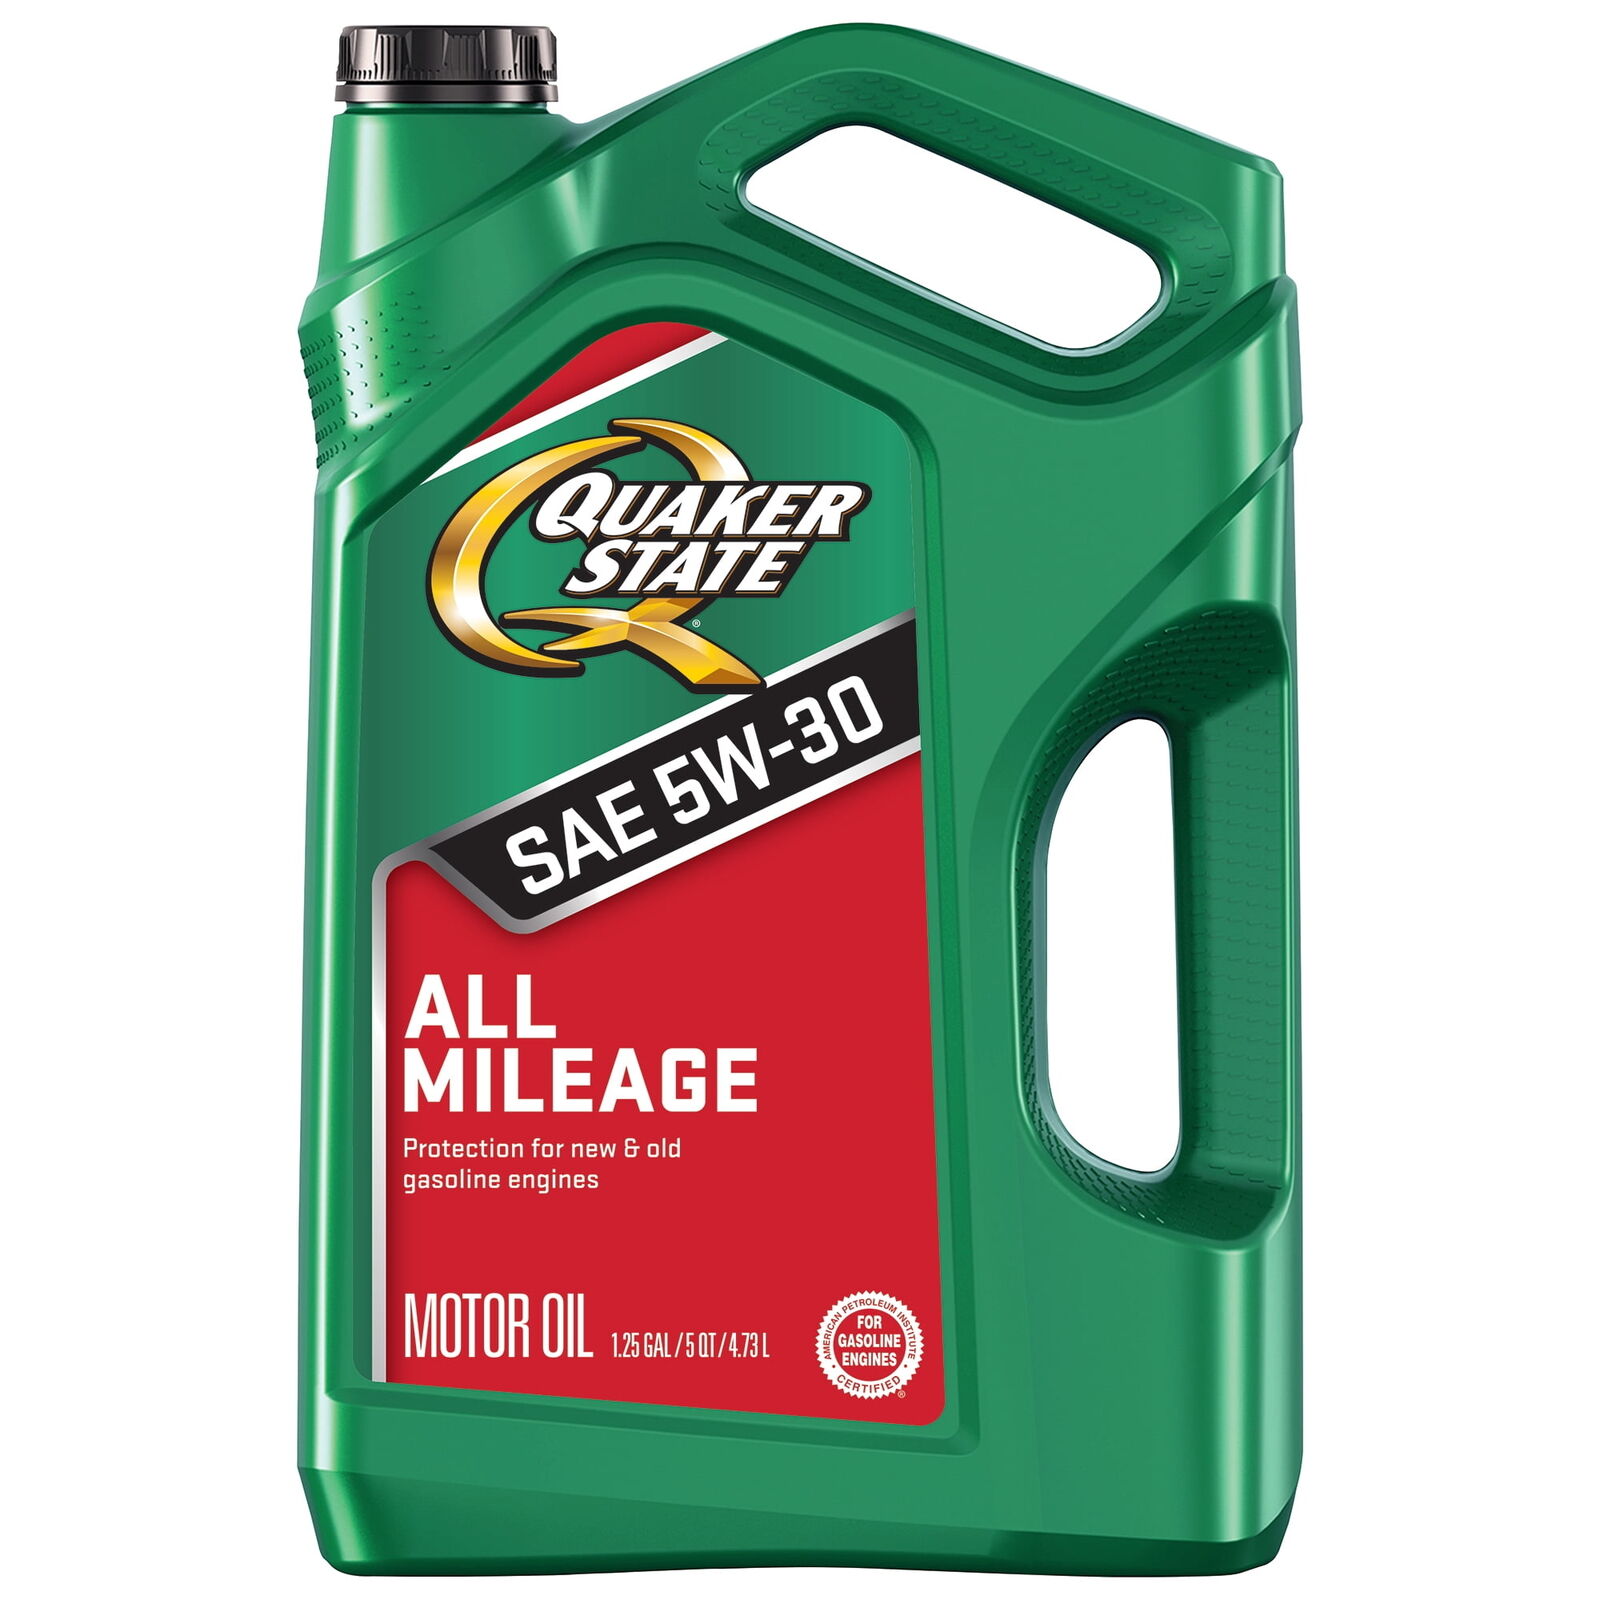 All Mileage Synthetic Blend 5W-30 Motor Oil, 5 Quart